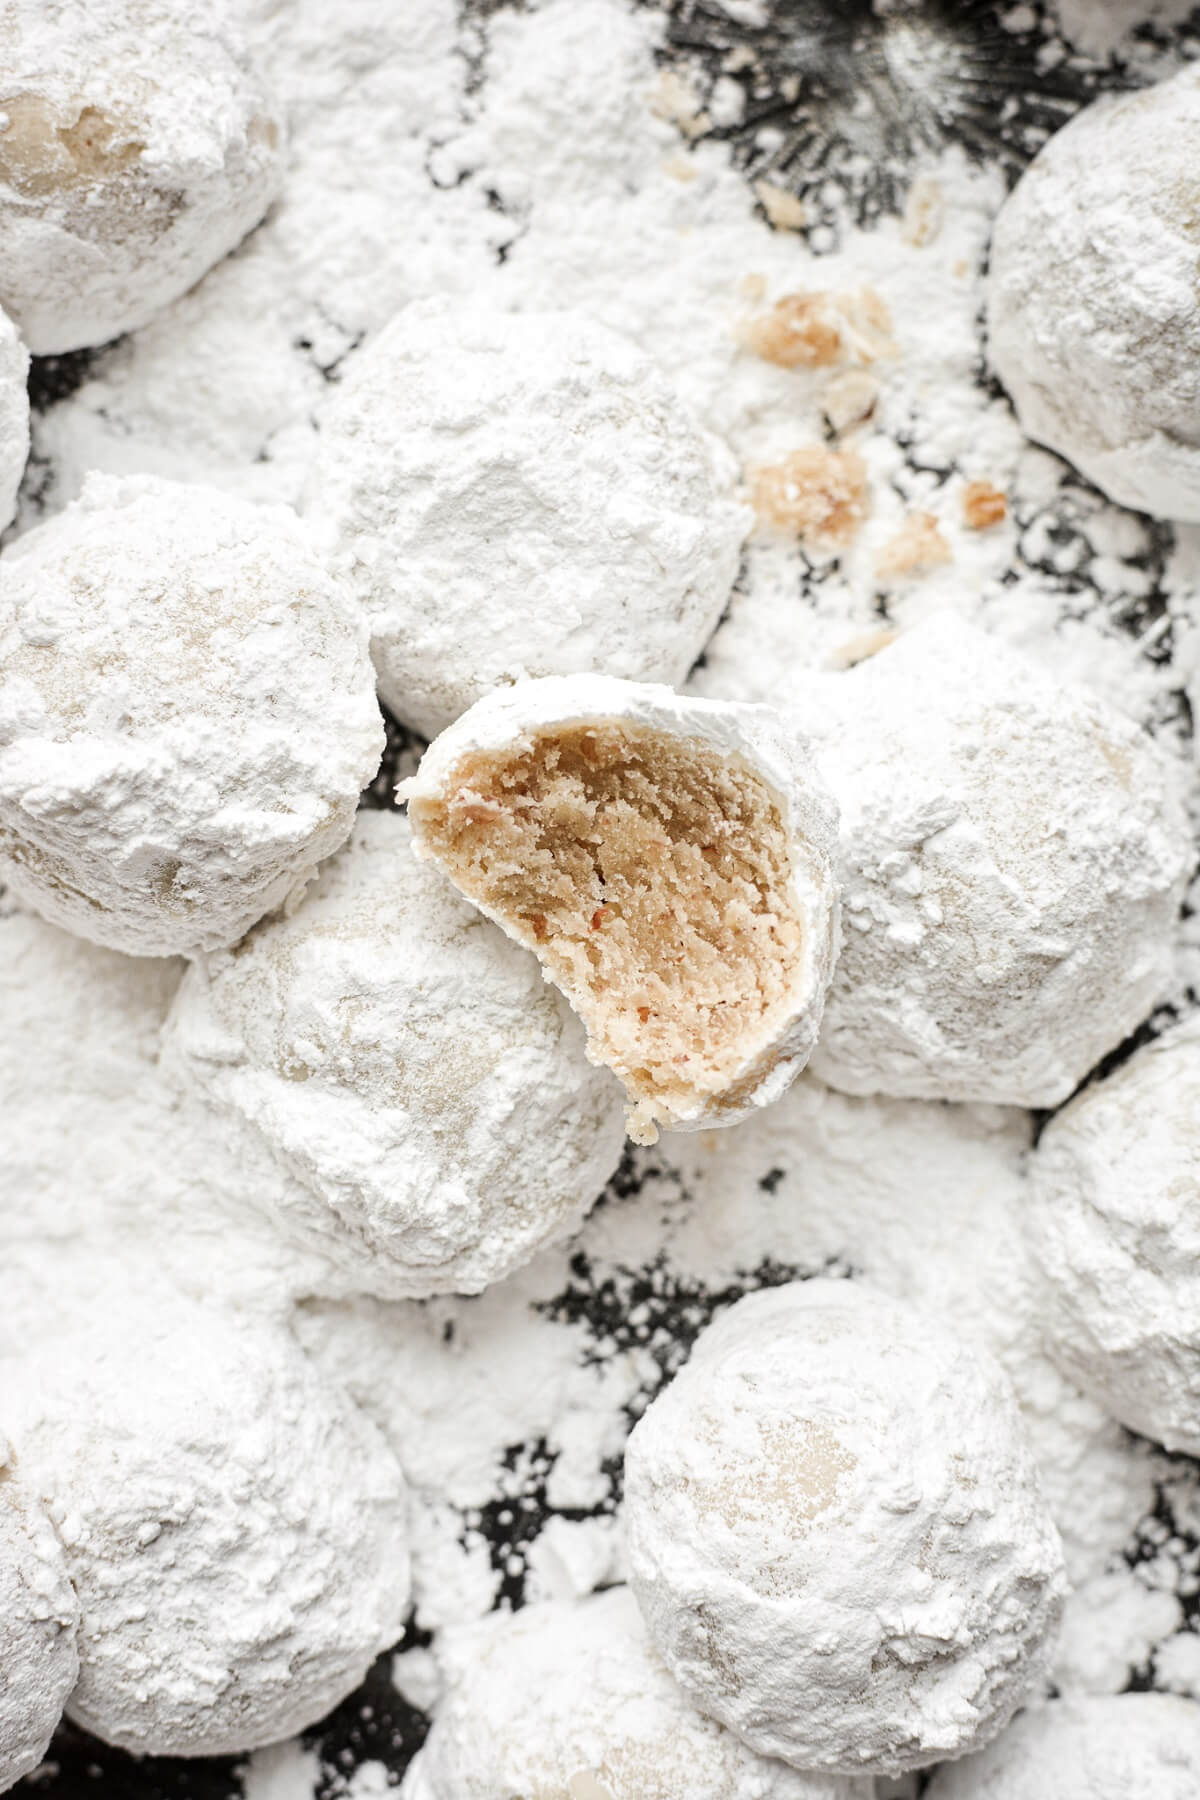 Snowball cookies, one with a bite taken.